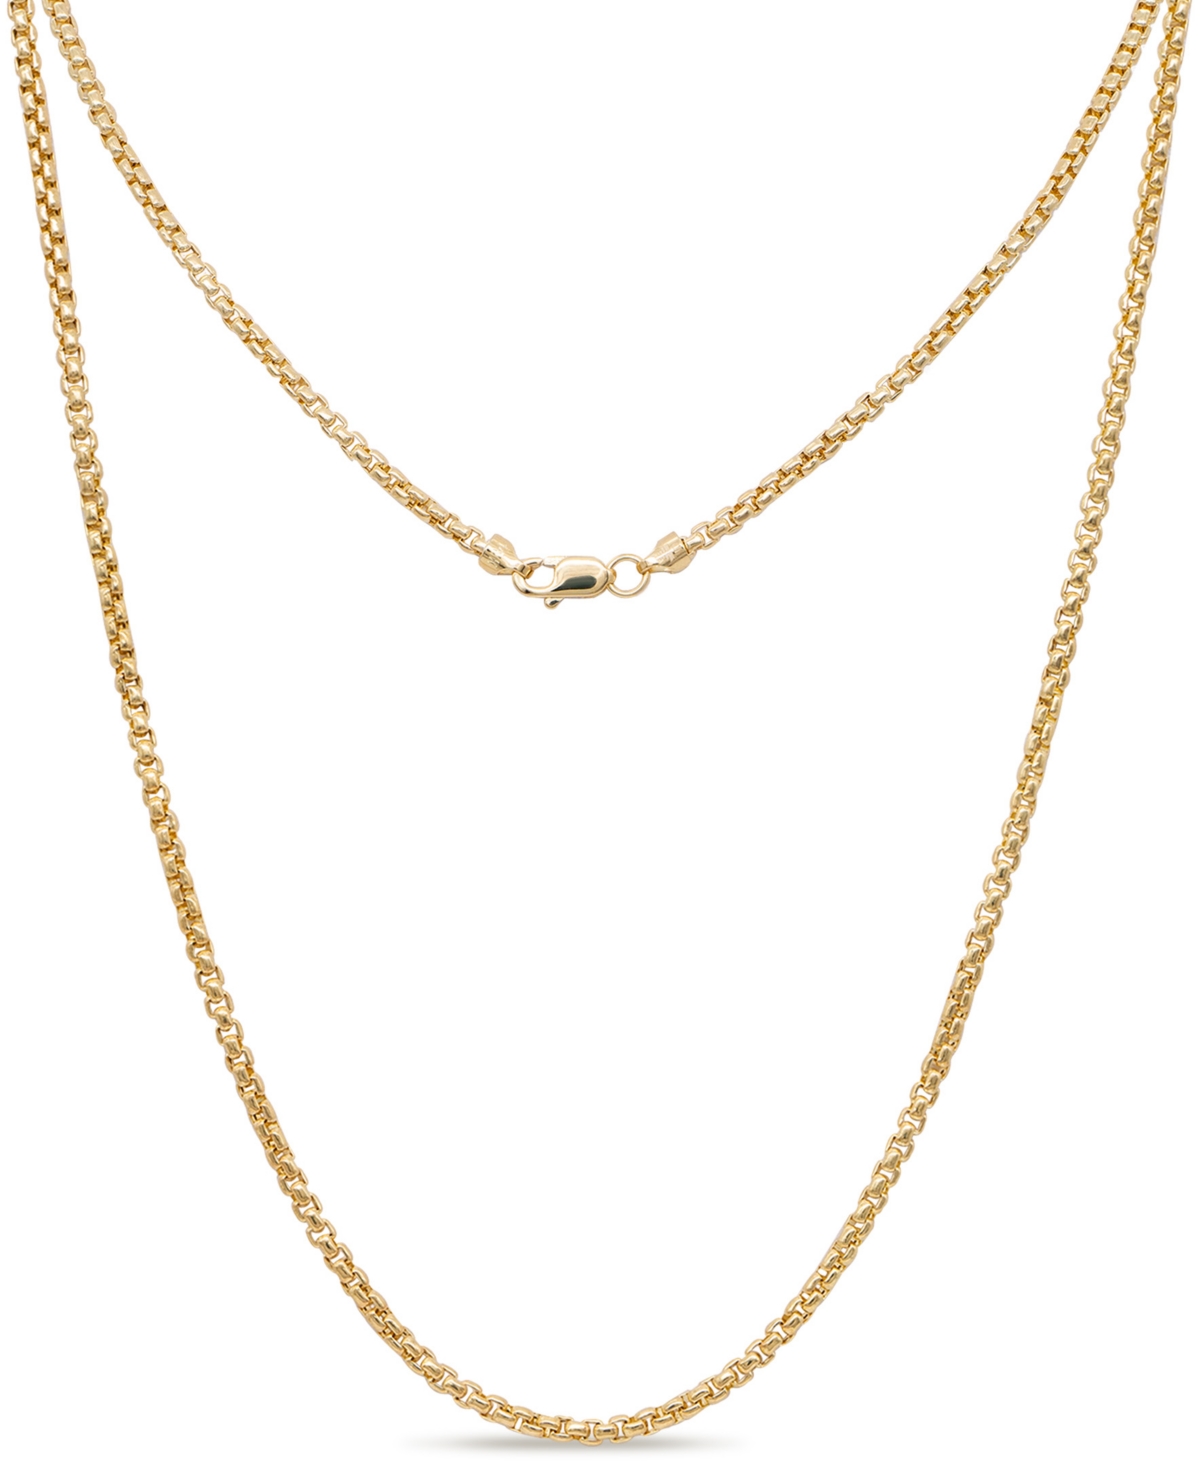 14K Gold Box Round 2mm Chain Necklace, 22", approx. 4.8grams - Gold